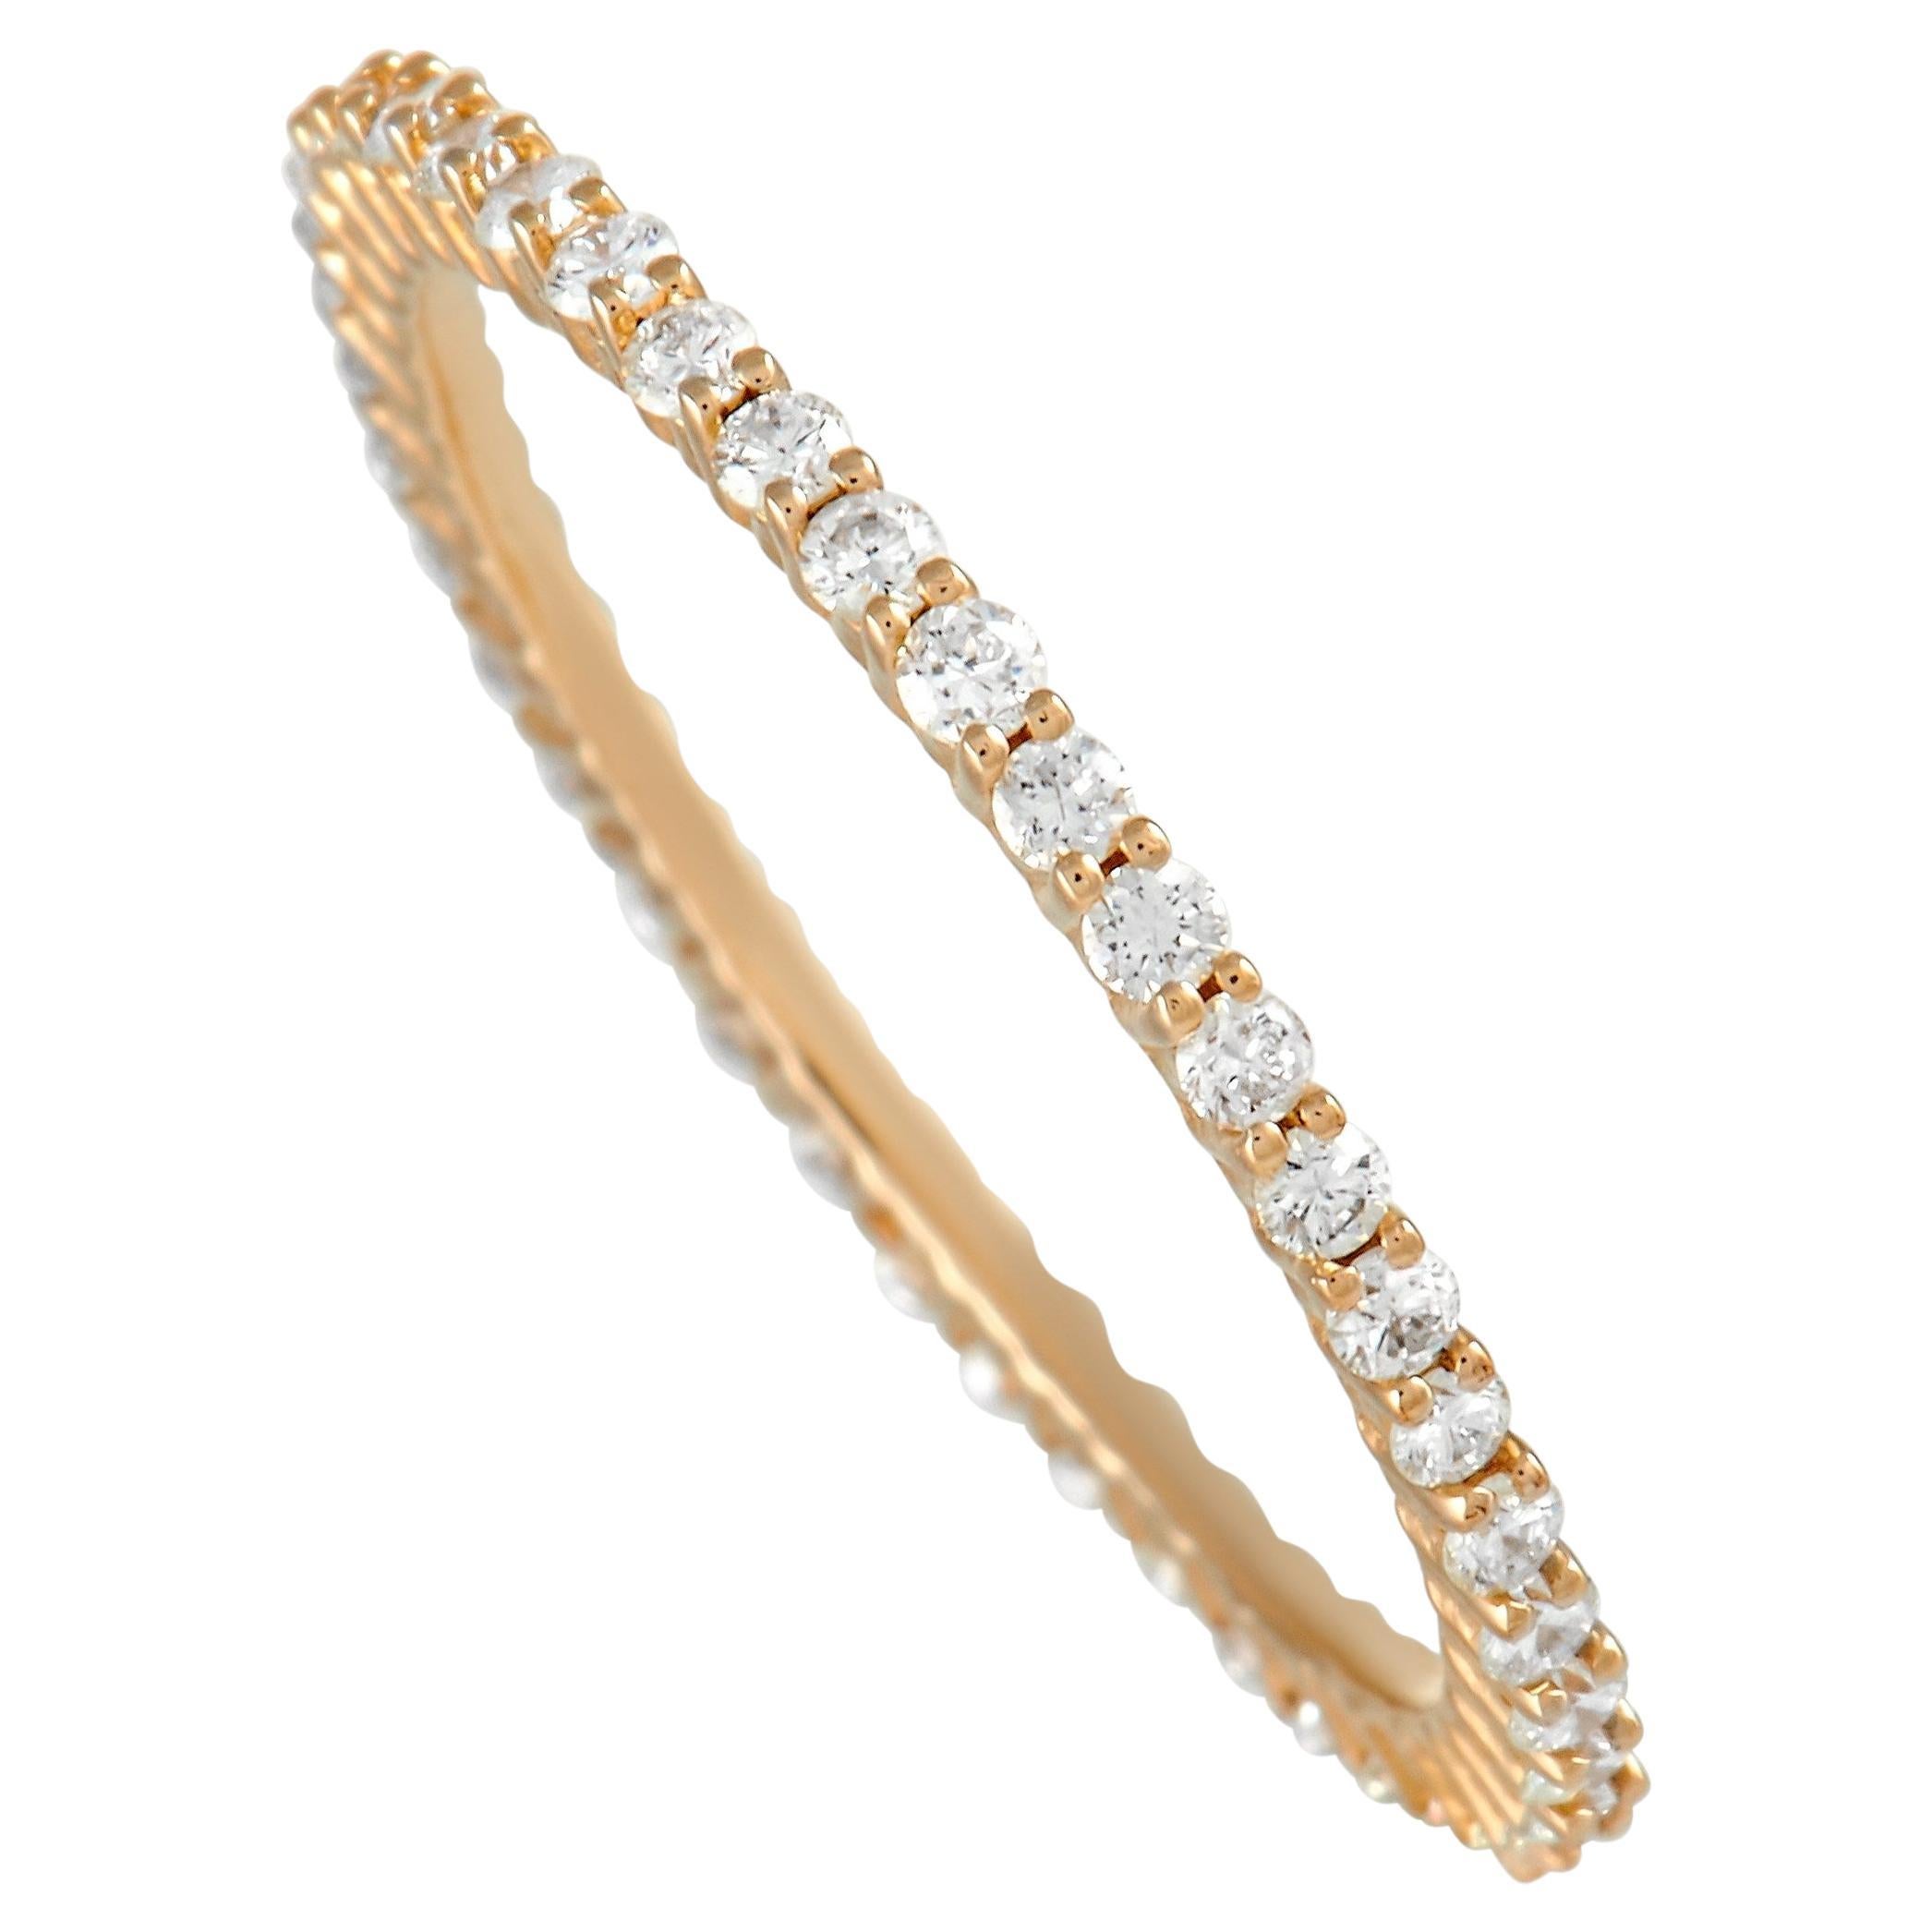 LB Exclusive 14K Yellow Gold 0.50 Ct Diamond Eternity Band Ring